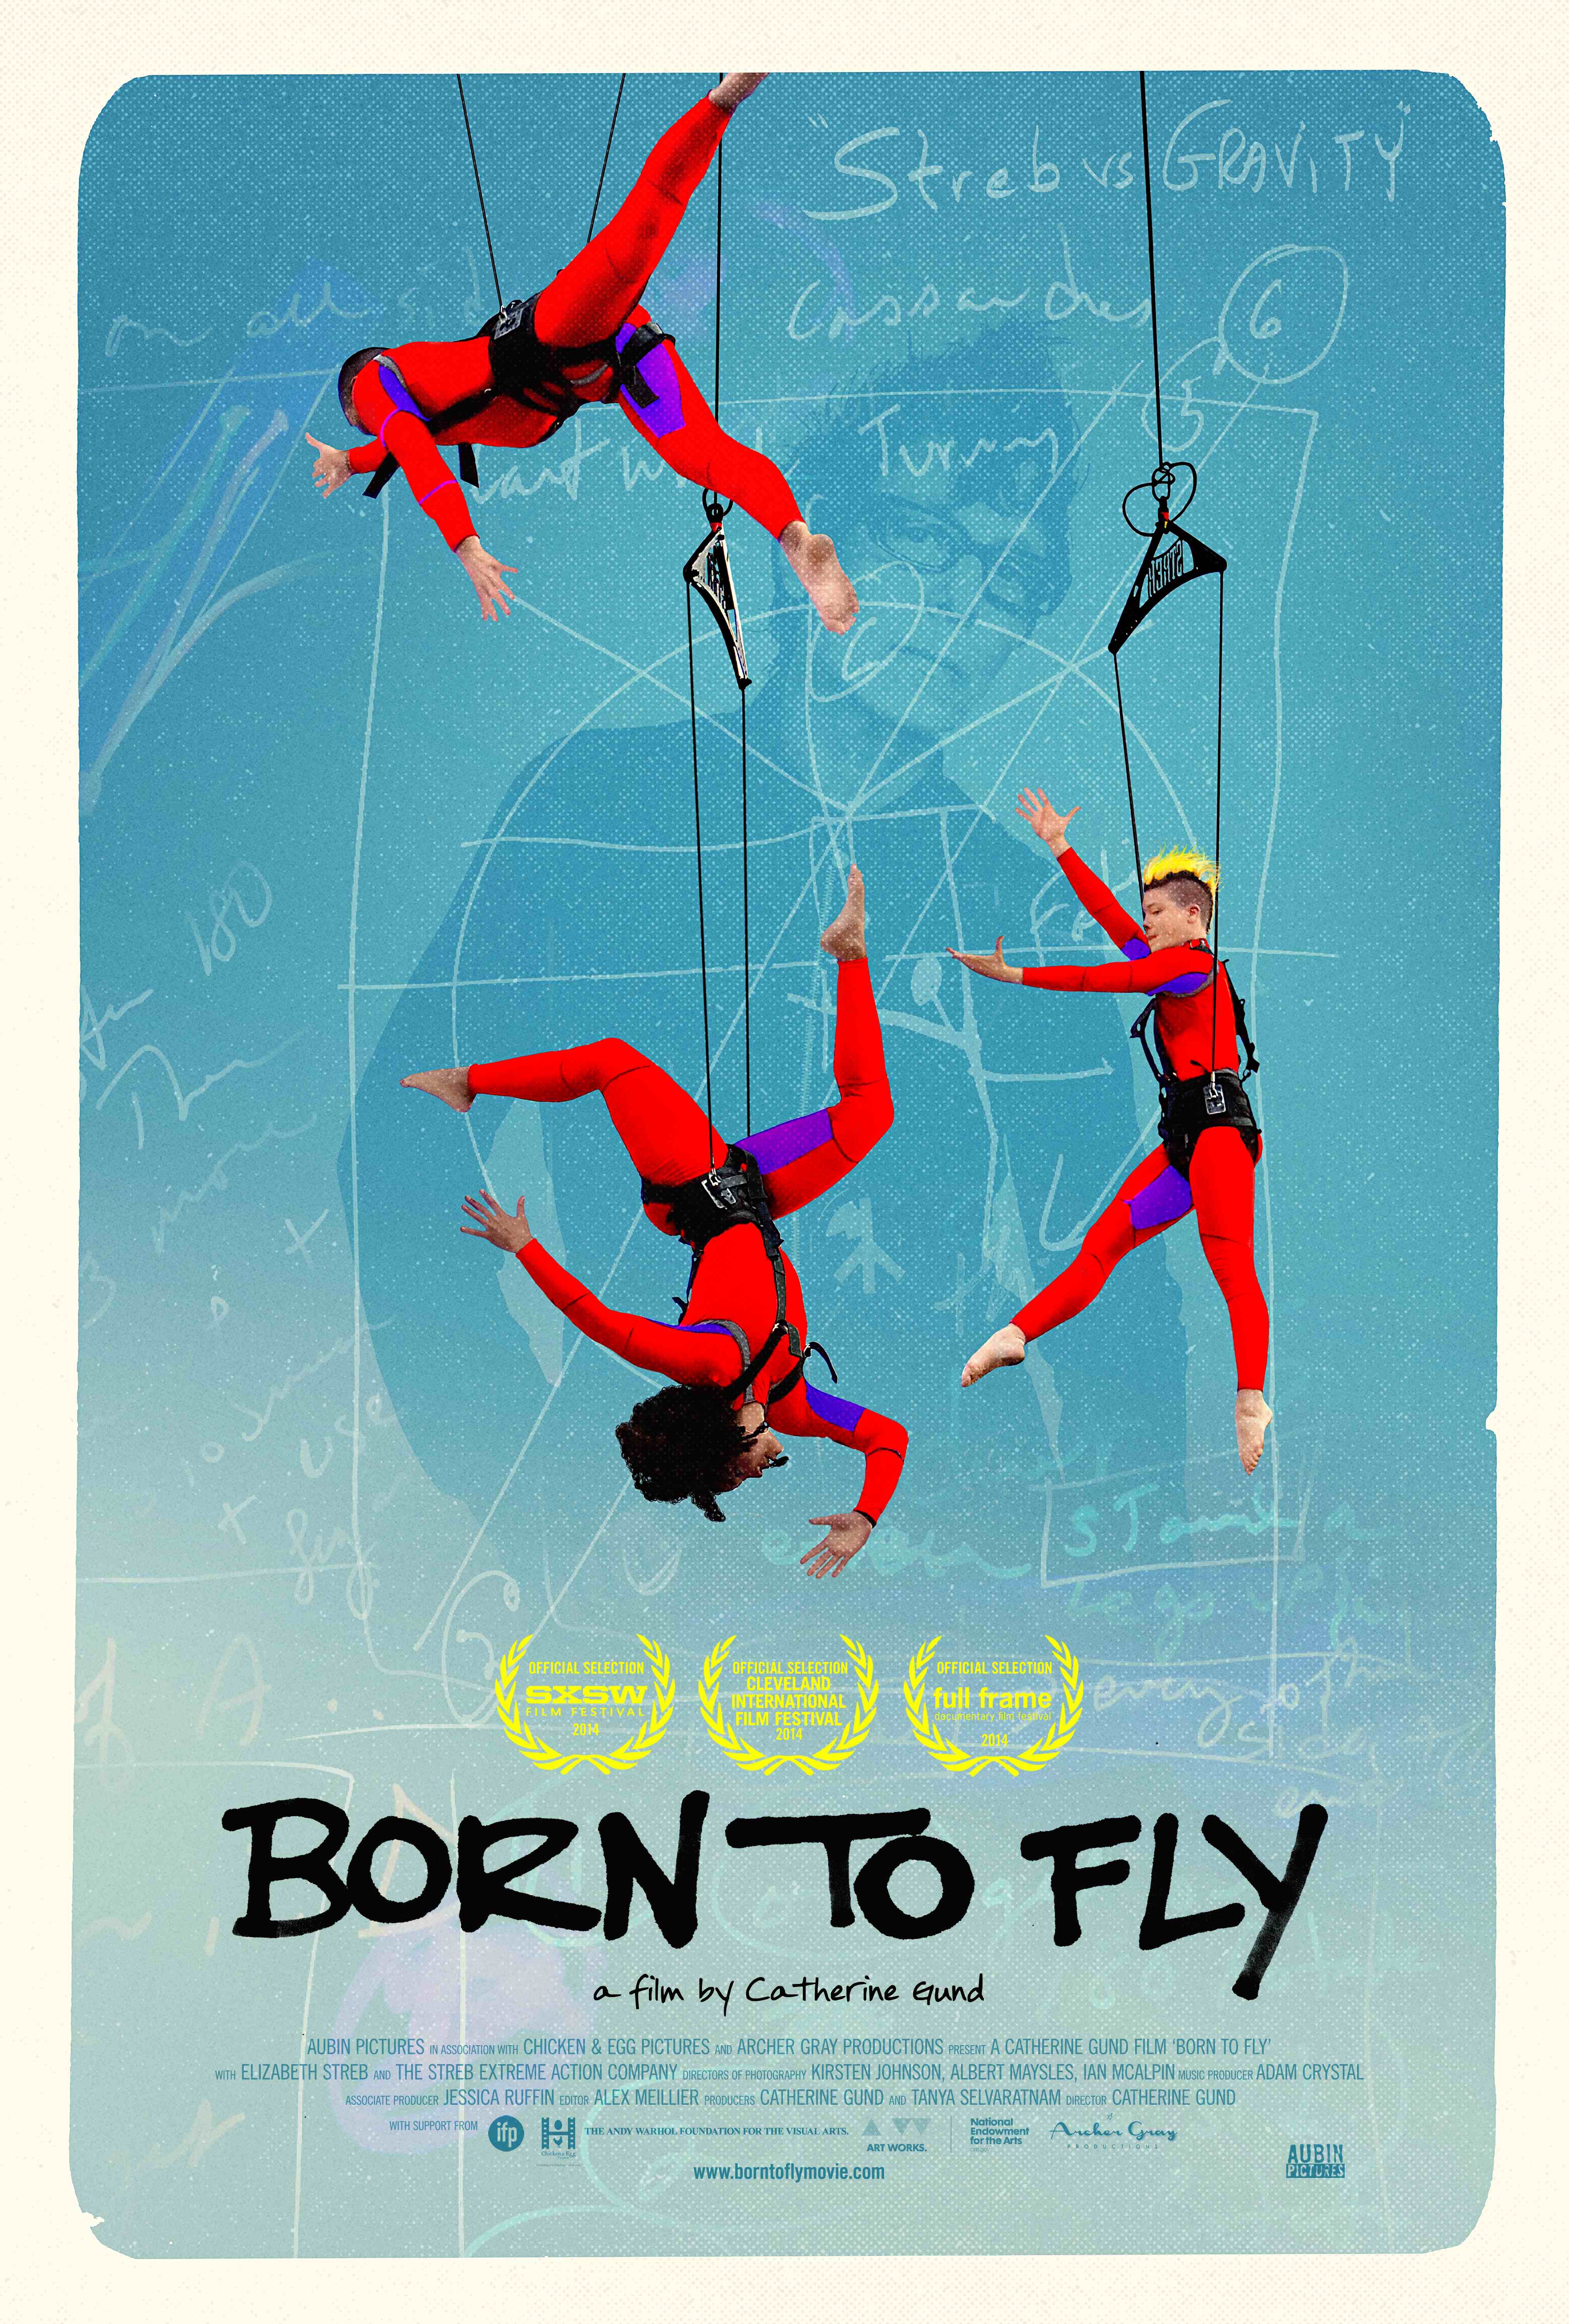 Poster of the film Born To Fly. A graphic with three people wearing harnesses and hanging, they have special red body suits. Behind them, there is an overshadowed silhouette of a person and tracings.